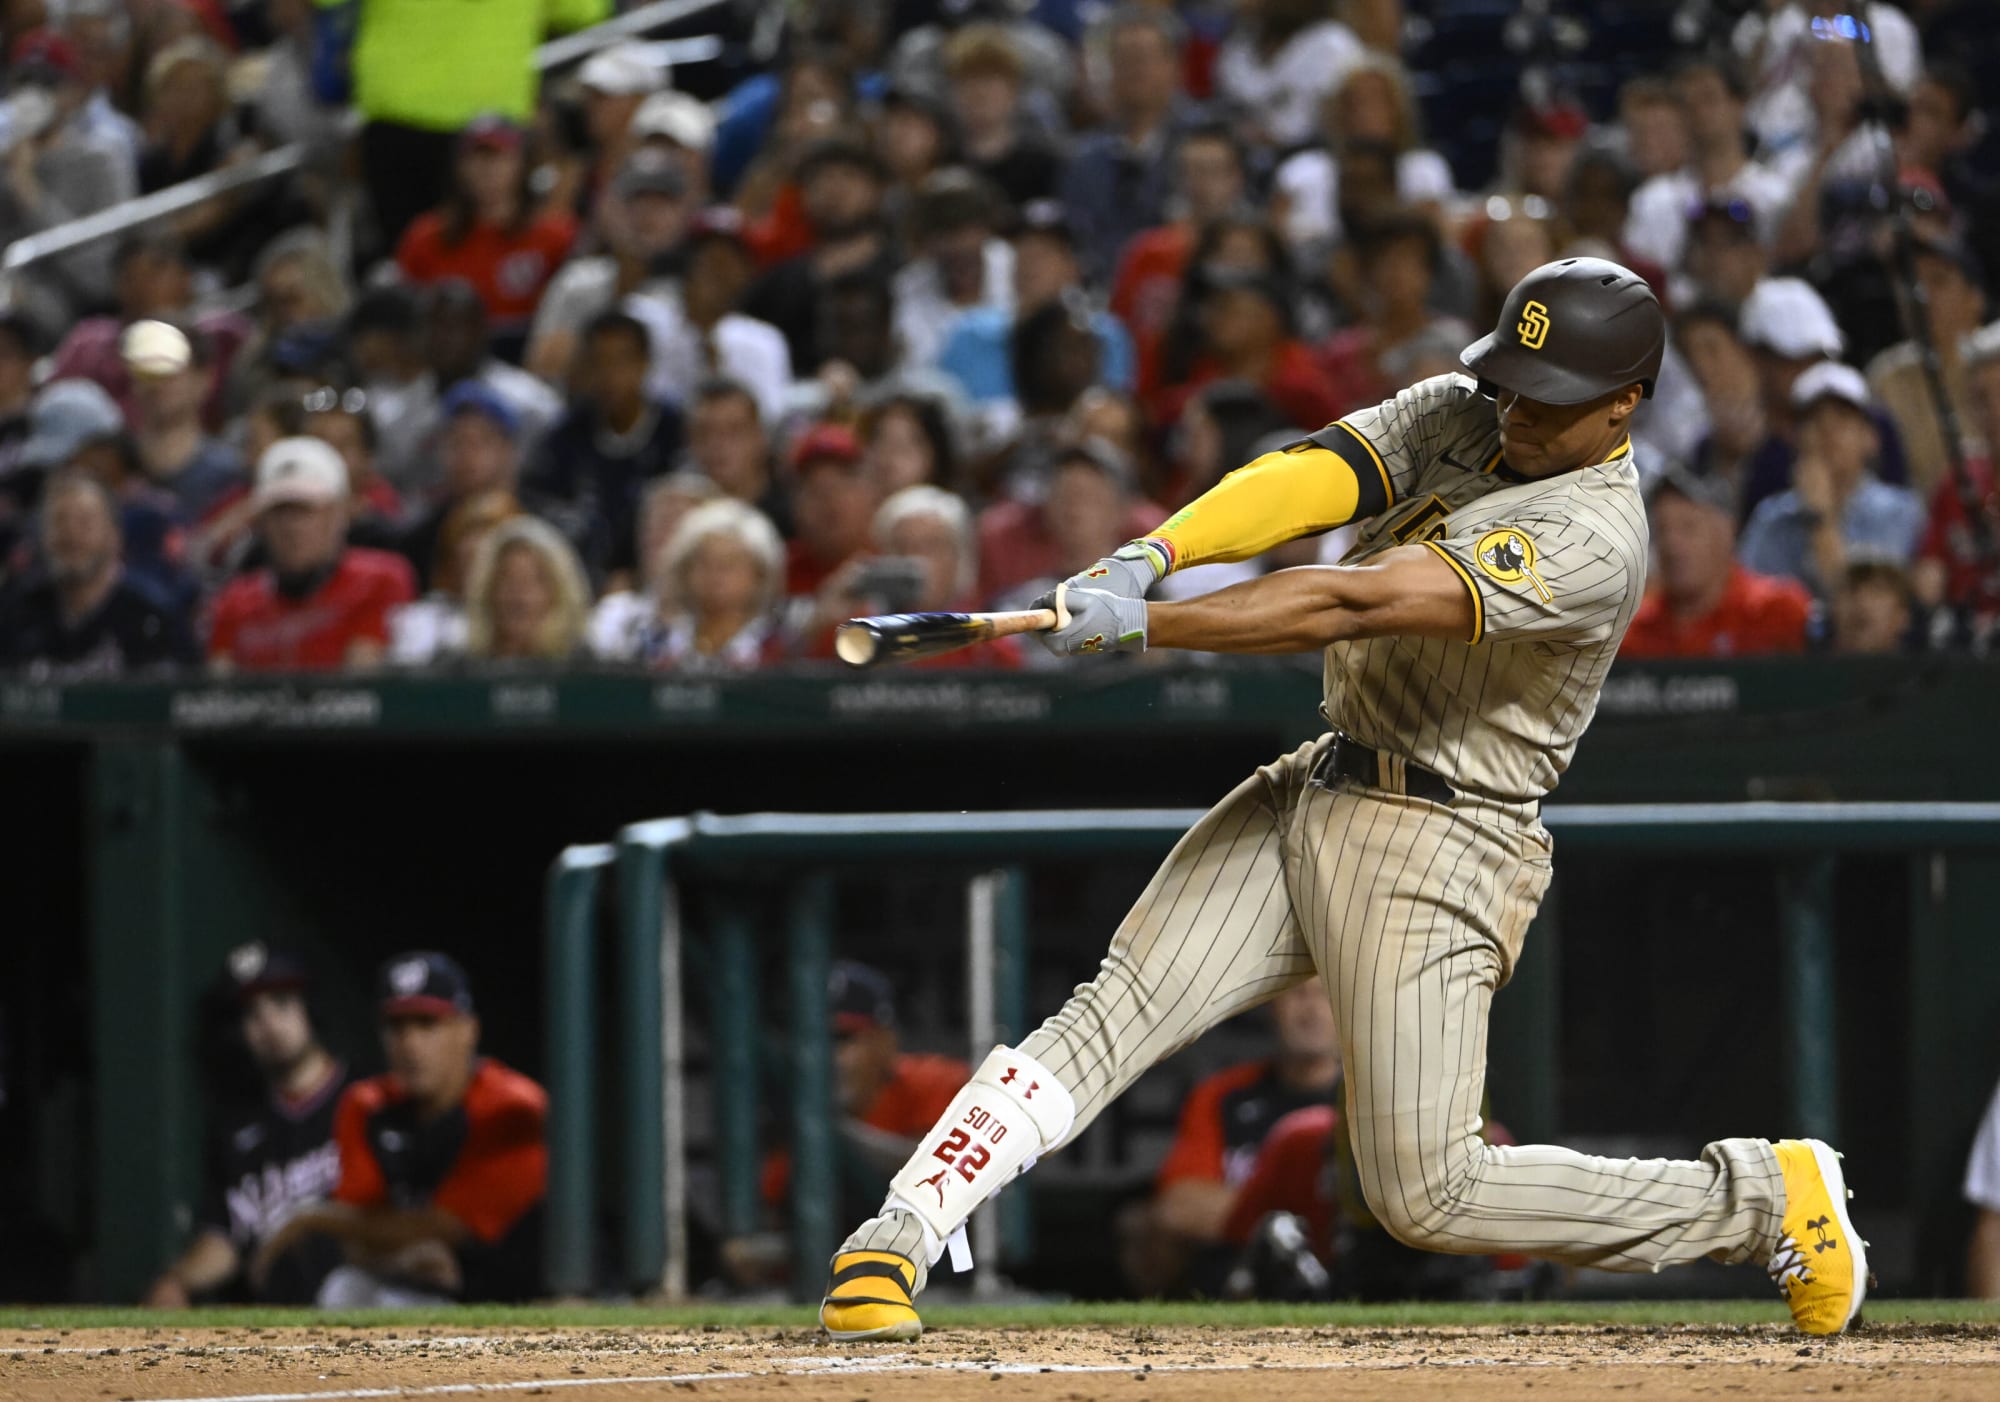 Padres Postgame (8/12): Offense shines in Soto’s return to D.C.